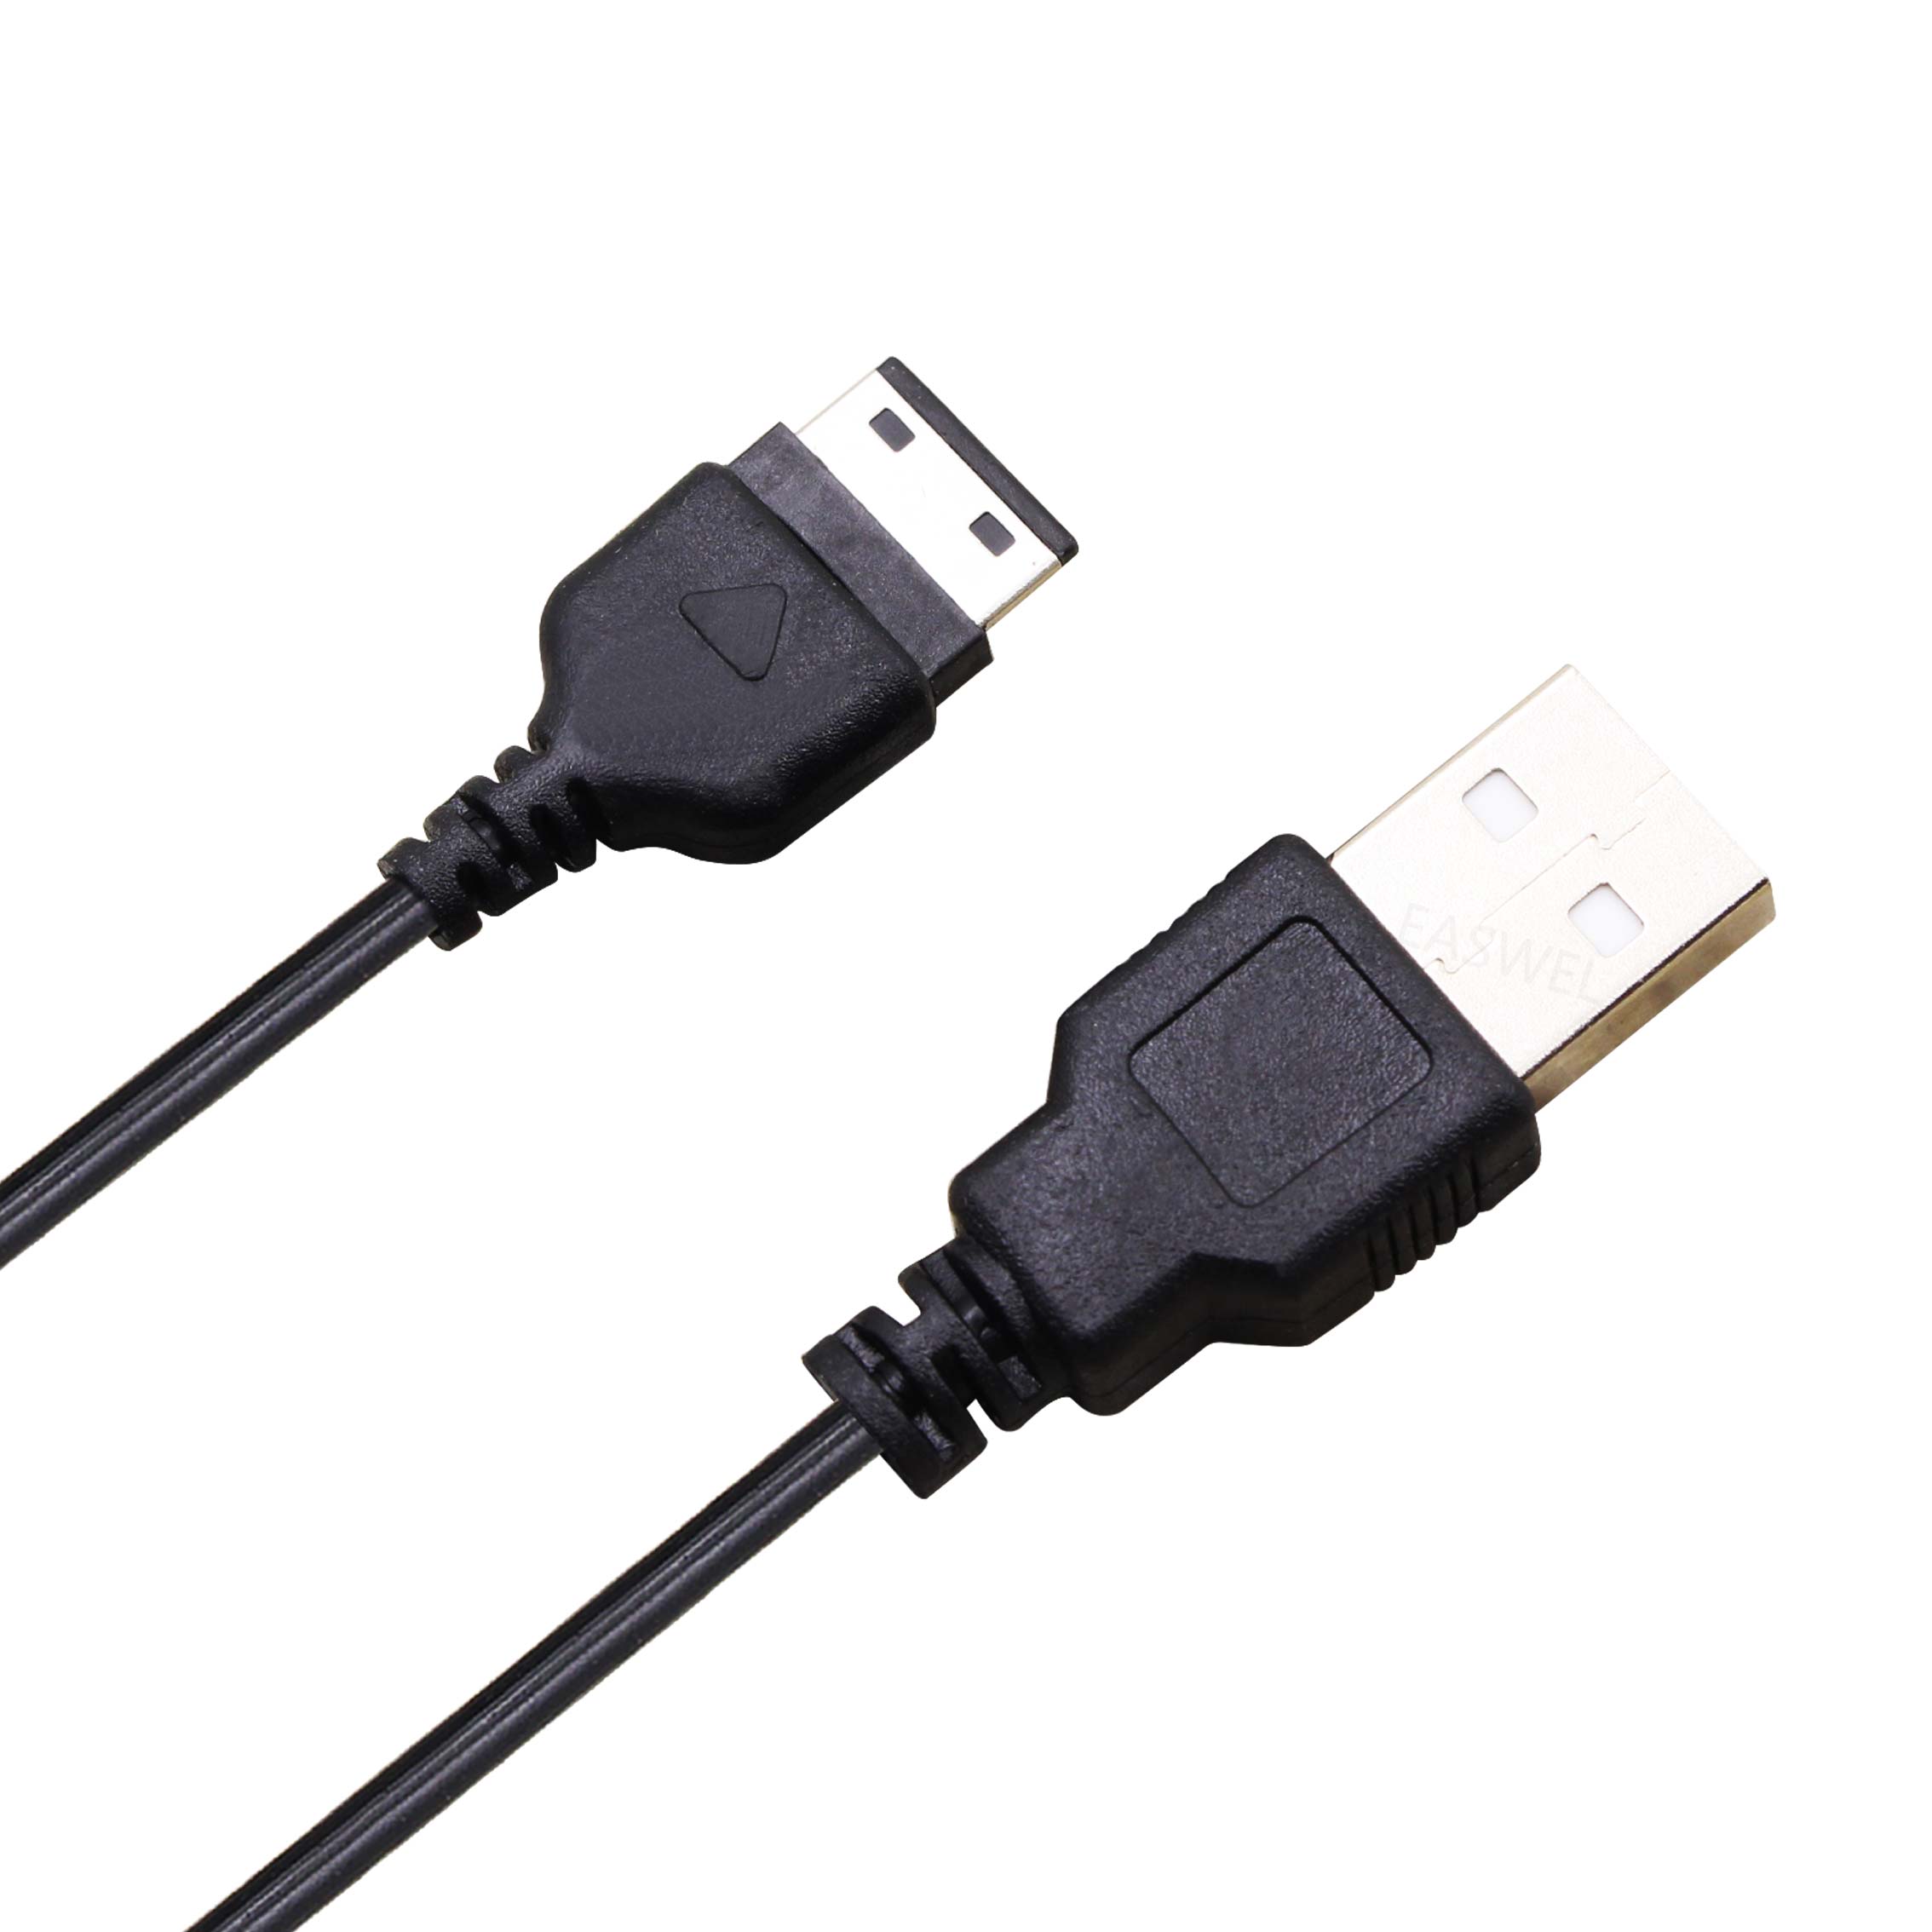 Usb Charger Data Cable Koord Voor Samsung Sph-m510 Sph-m520 Gt-e1100 Gt-e1105 Gt-e1107 Gt-e1120 Sgh-d720 Sgh-d780 Sgh-d800